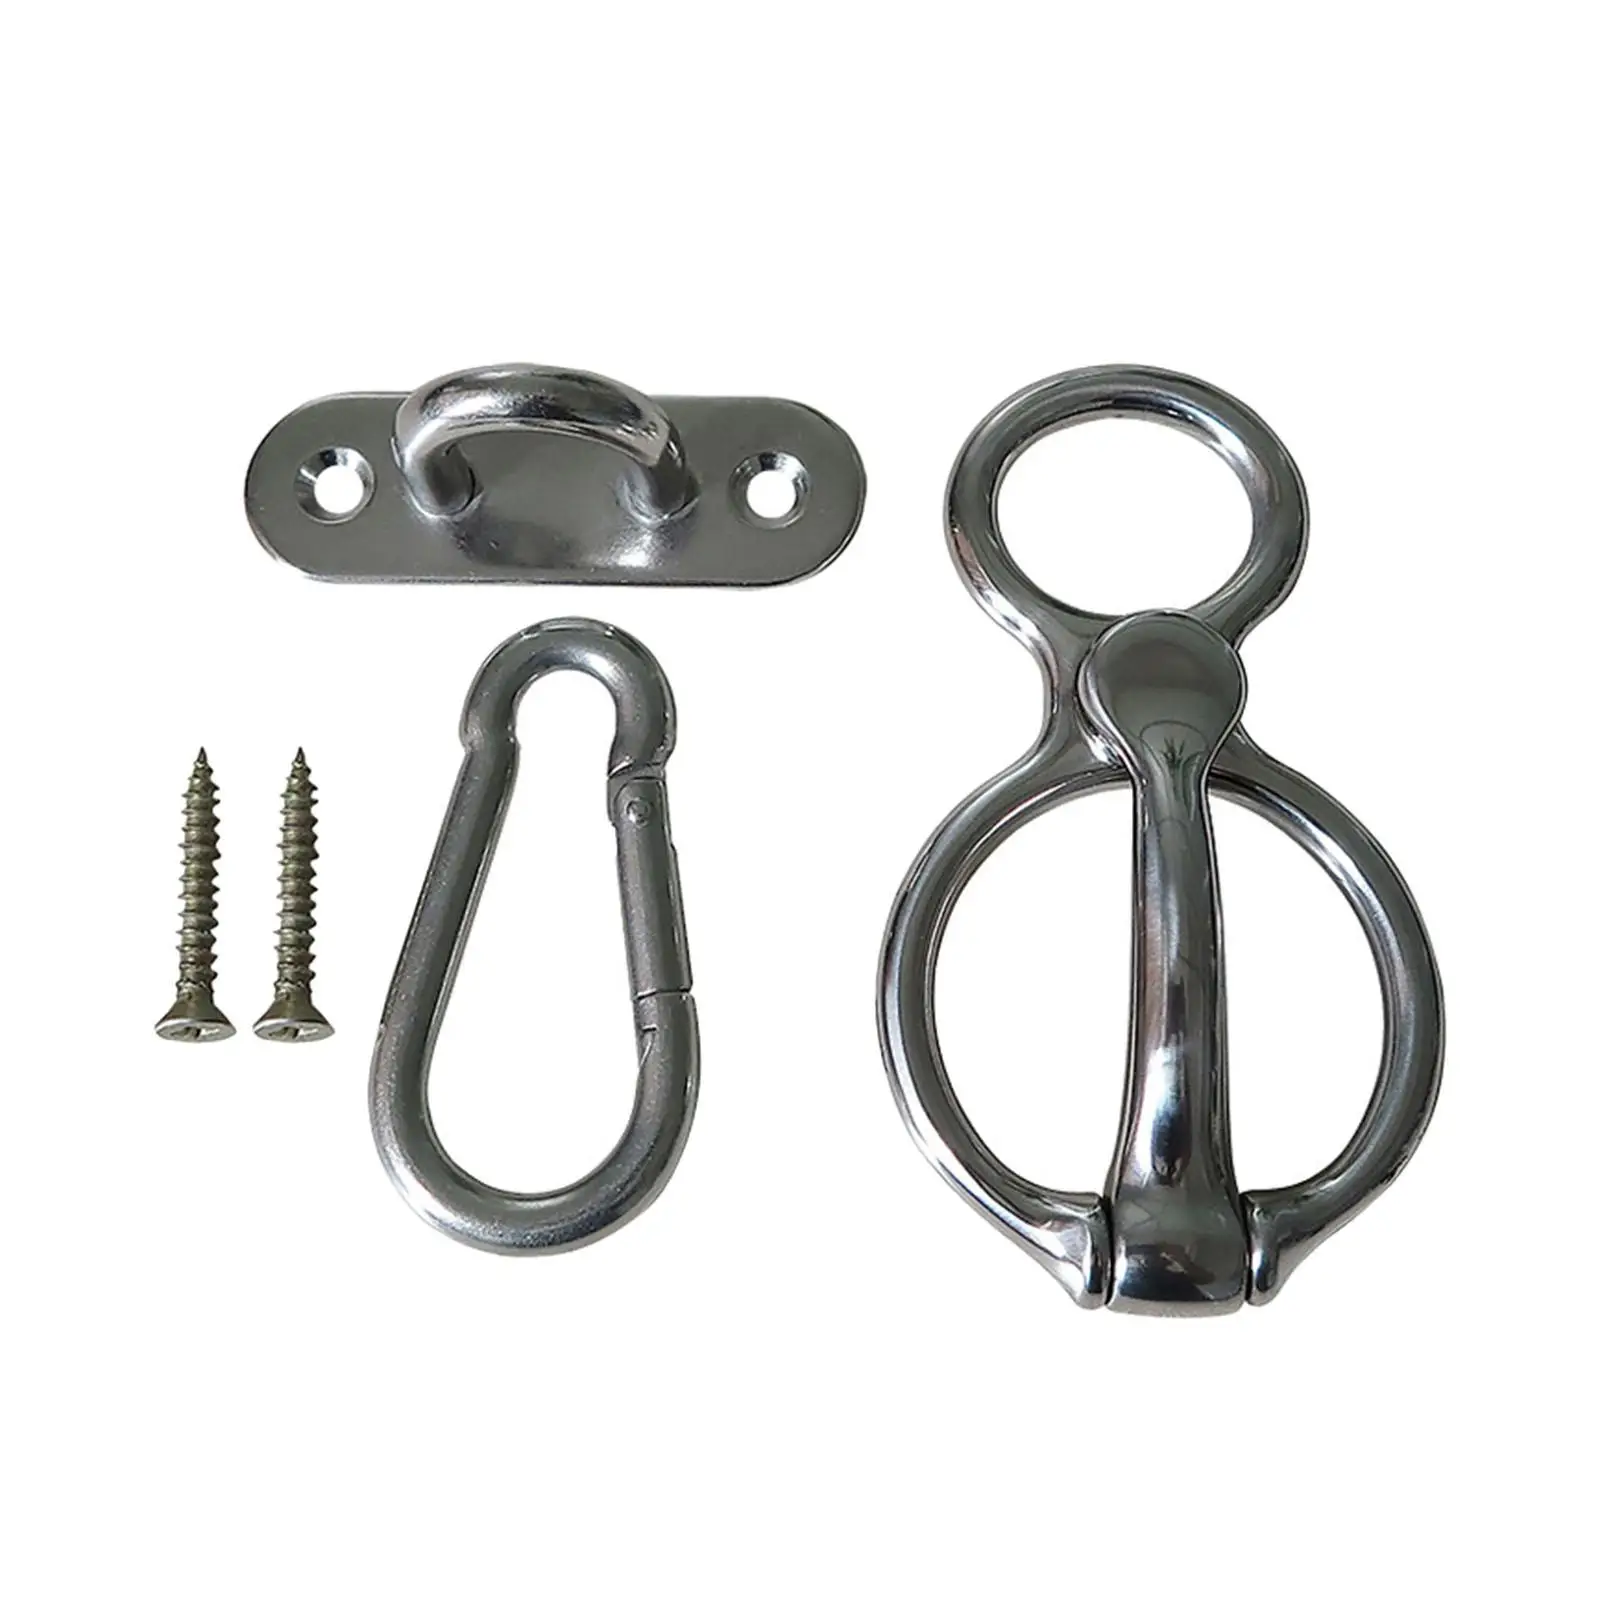 Horse Tie Ring Equestrian Stainless Steel Durable with Eye Bolt Hooks Training Equipment Stable Accessories Horse Tack Supplies